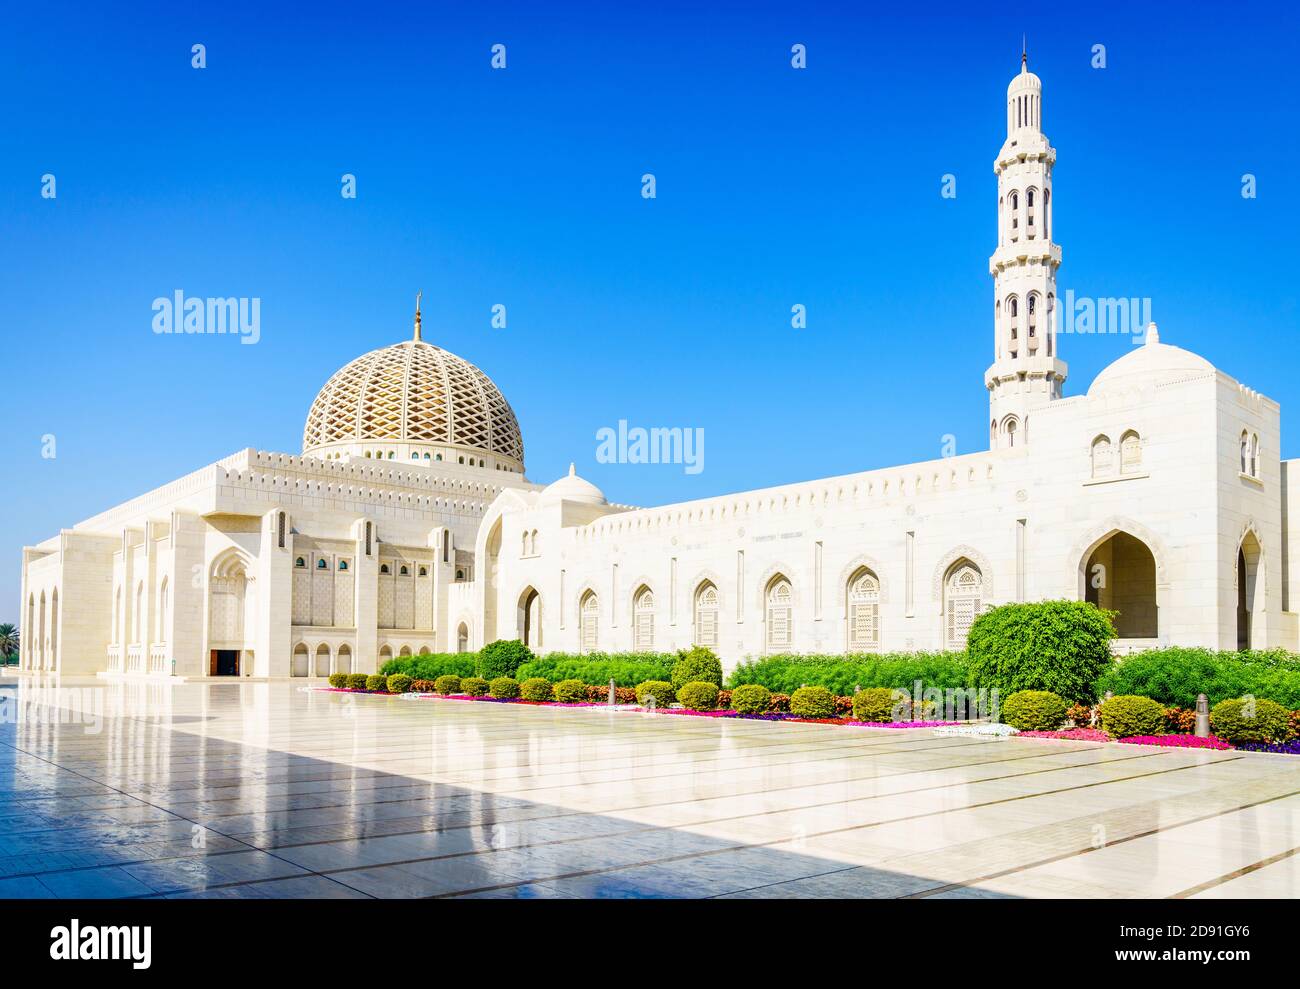 Exterior of the Sultan Qaboos Grand Mosque in Muscat, Oman Stock Photo